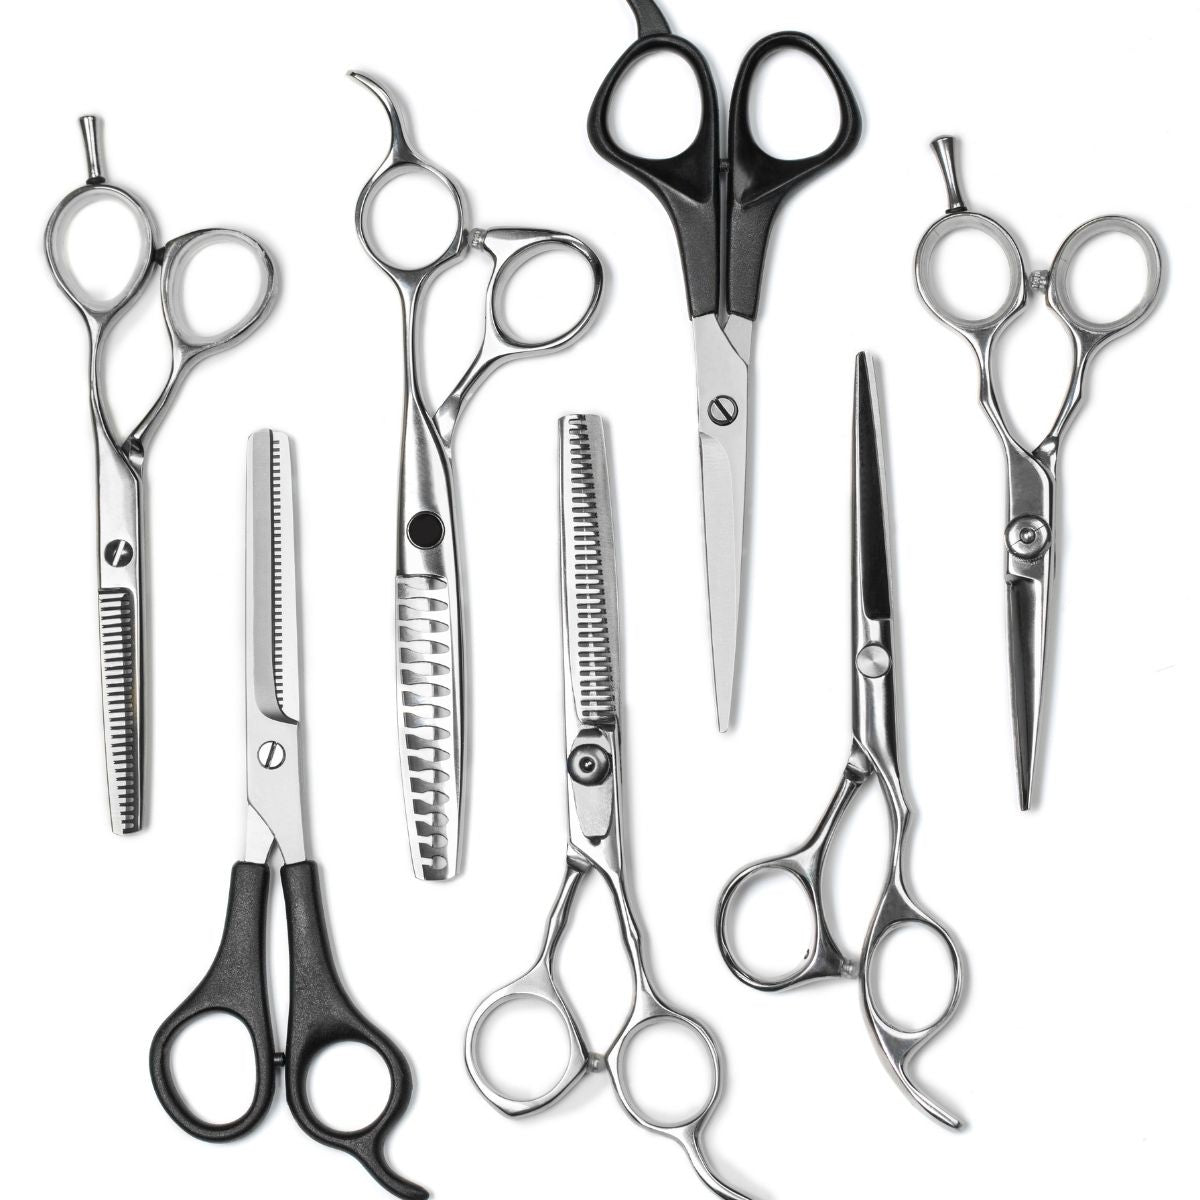 The different types of hairdressing scissors